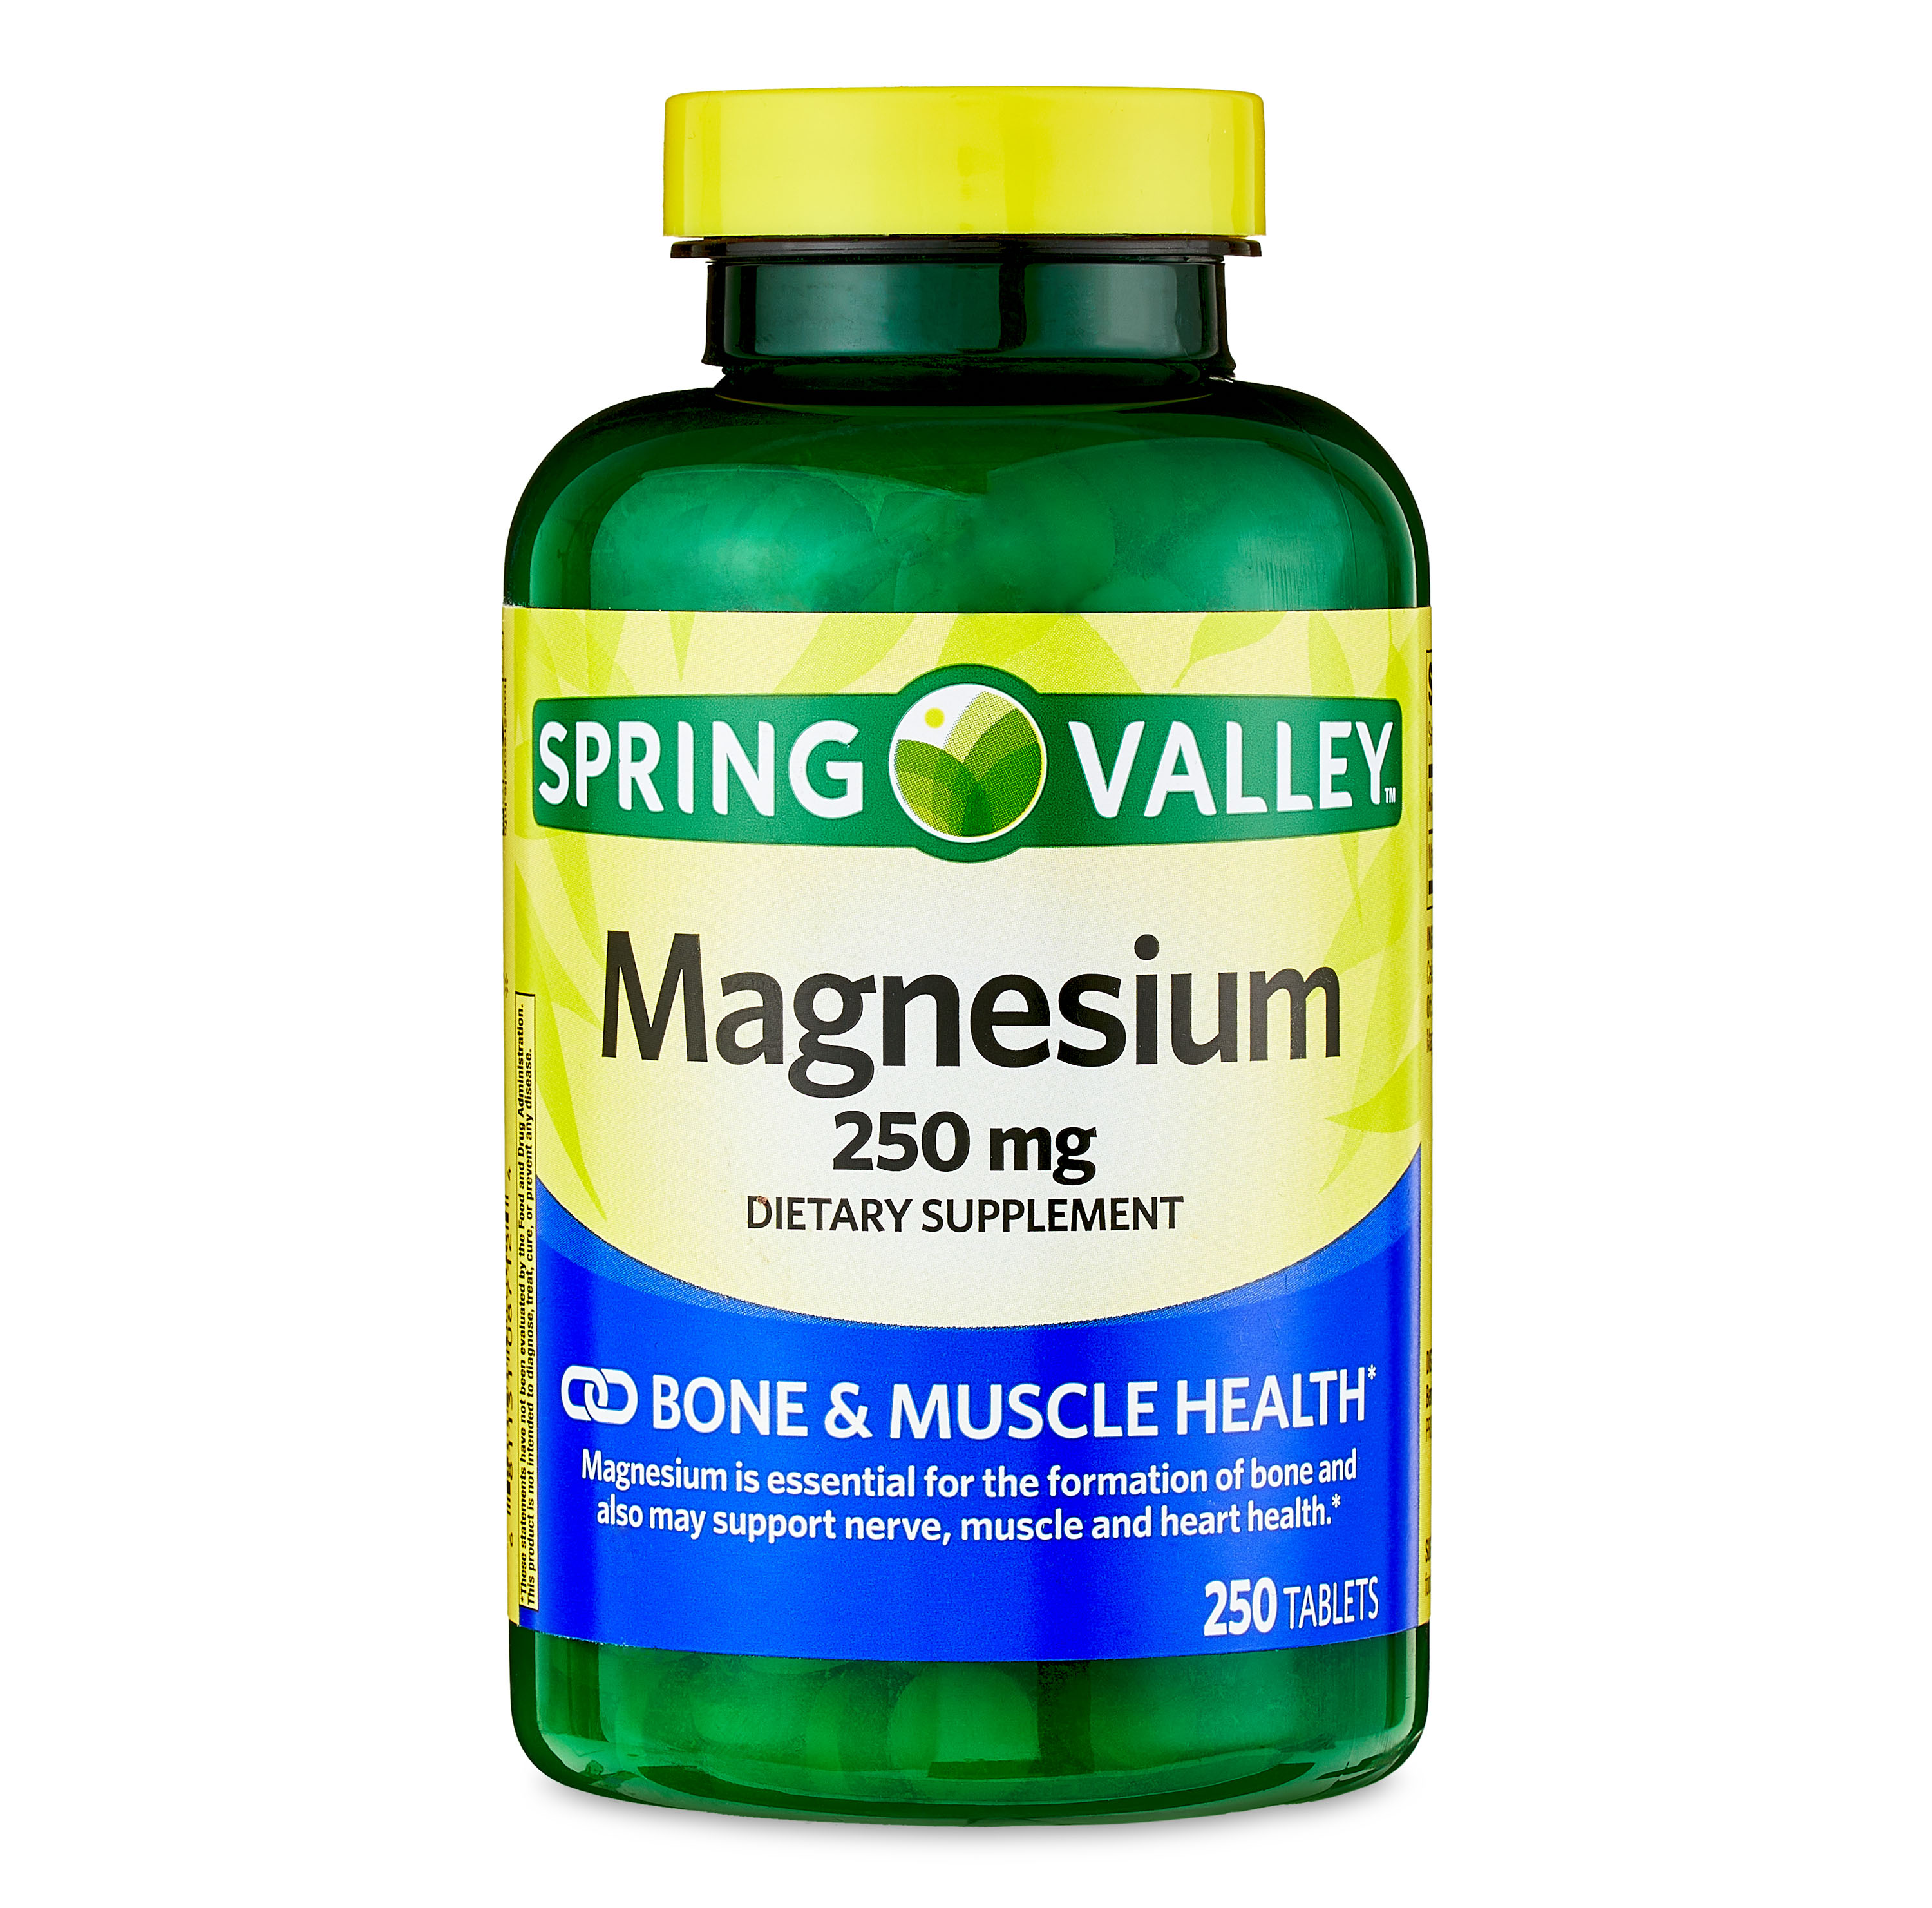 Spring Valley Magnesium Bone & Muscle Health Dietary Supplement Tablets, 250 mg, 250 Count - image 1 of 10